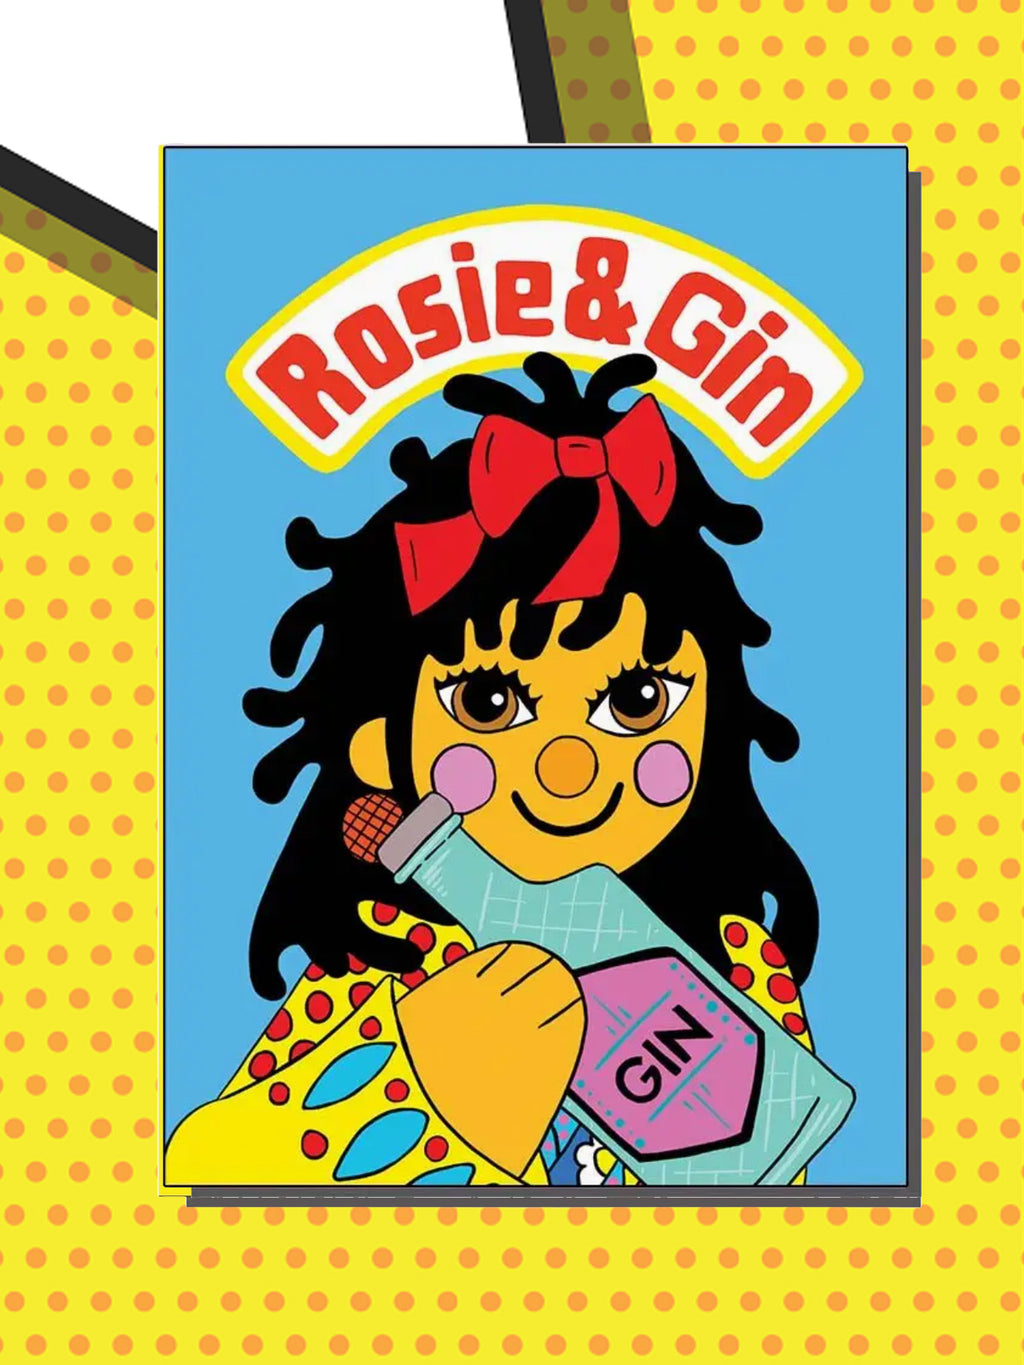 Greeting Card - Rosie and Gin